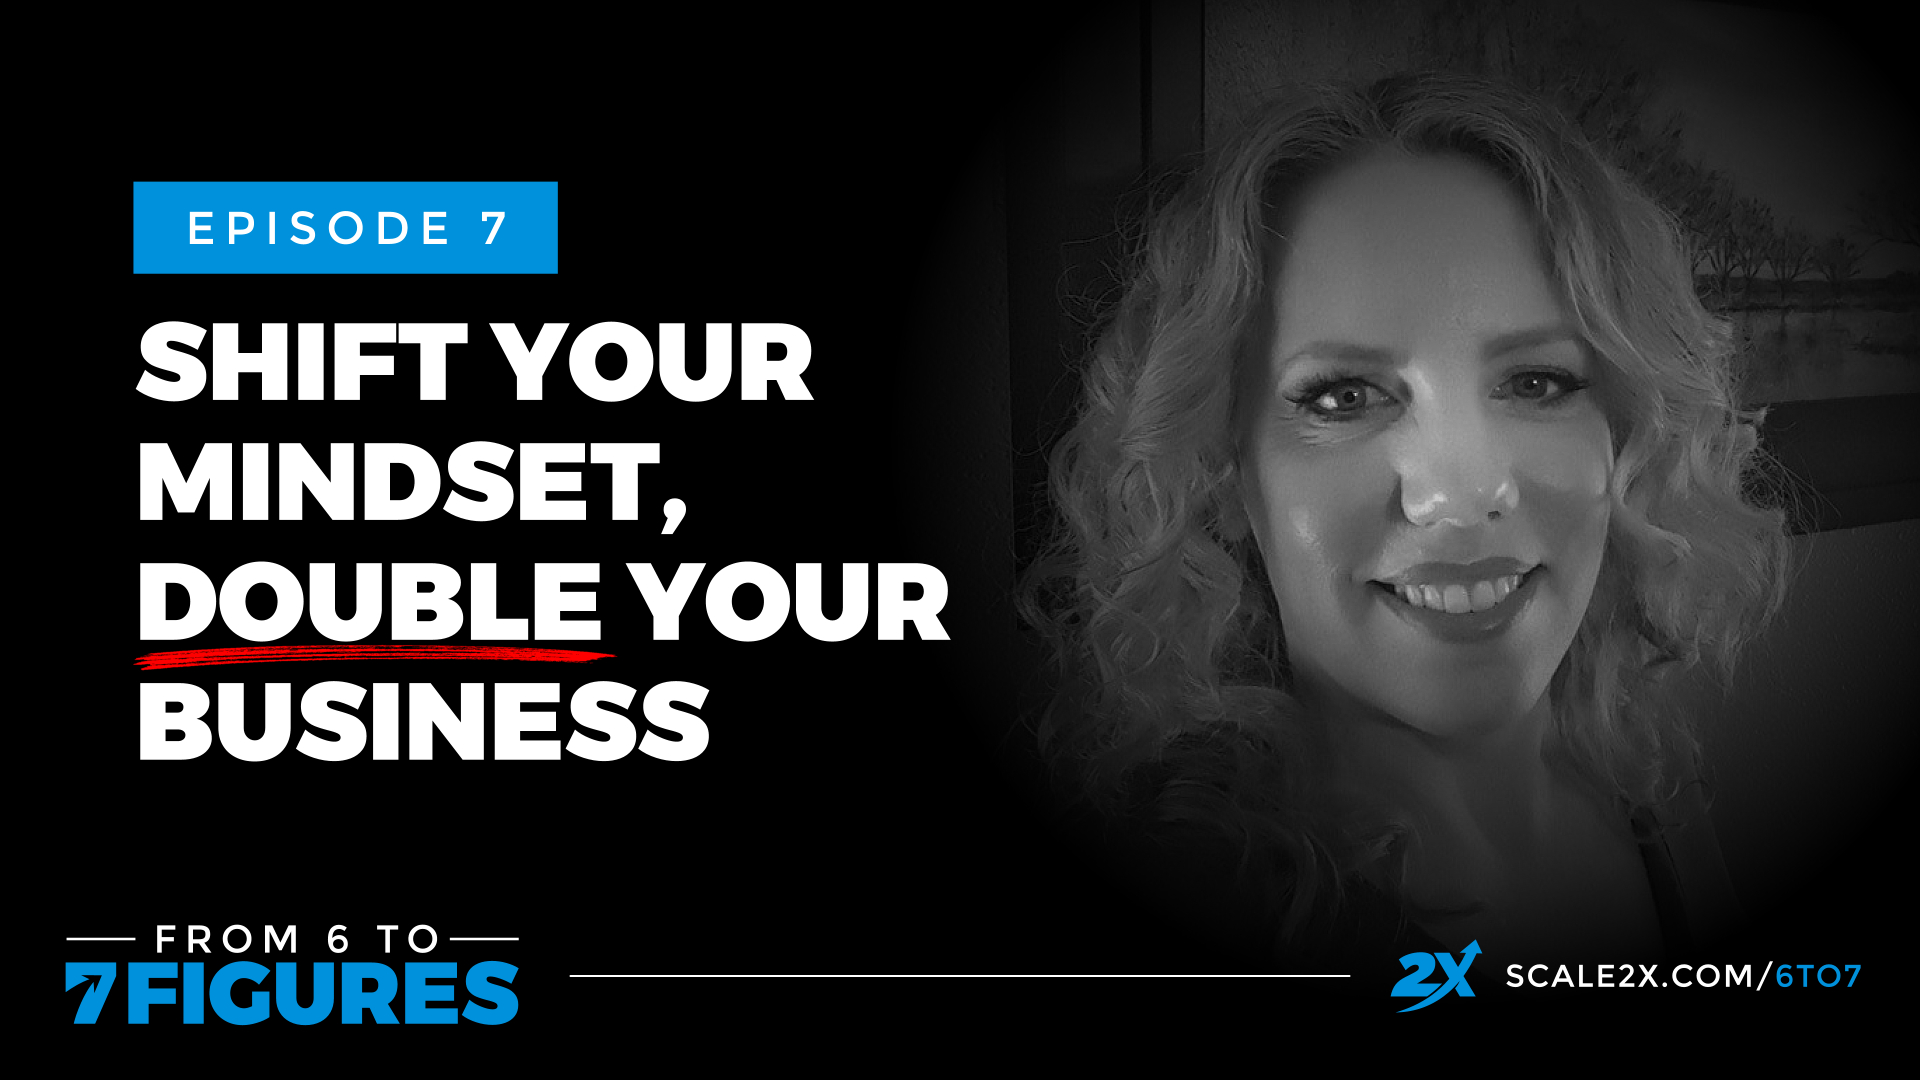 Episode 07: Shift Your Mindset, Double Your Business